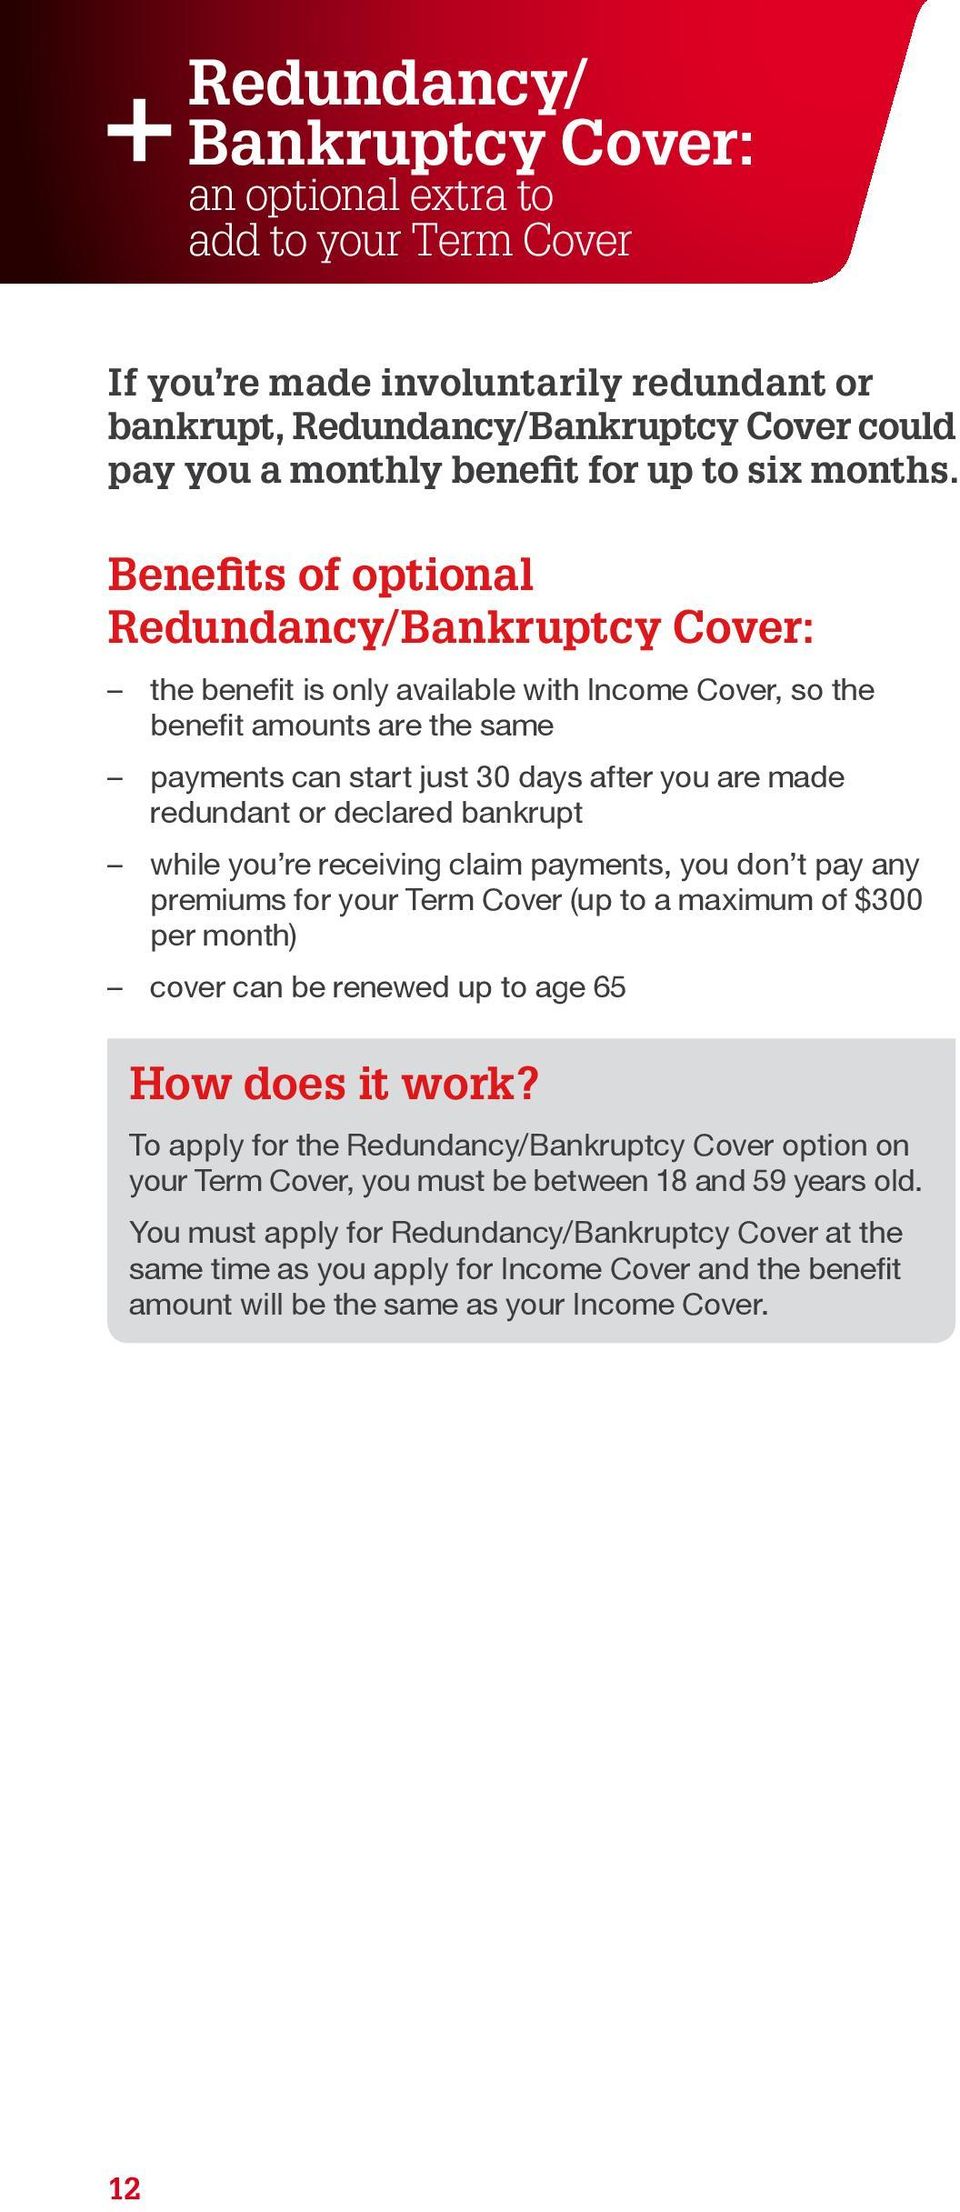 Benefits of optional Redundancy/Bankruptcy Cover: the benefit is only available with Income Cover, so the benefit amounts are the same payments can start just 30 days after you are made redundant or